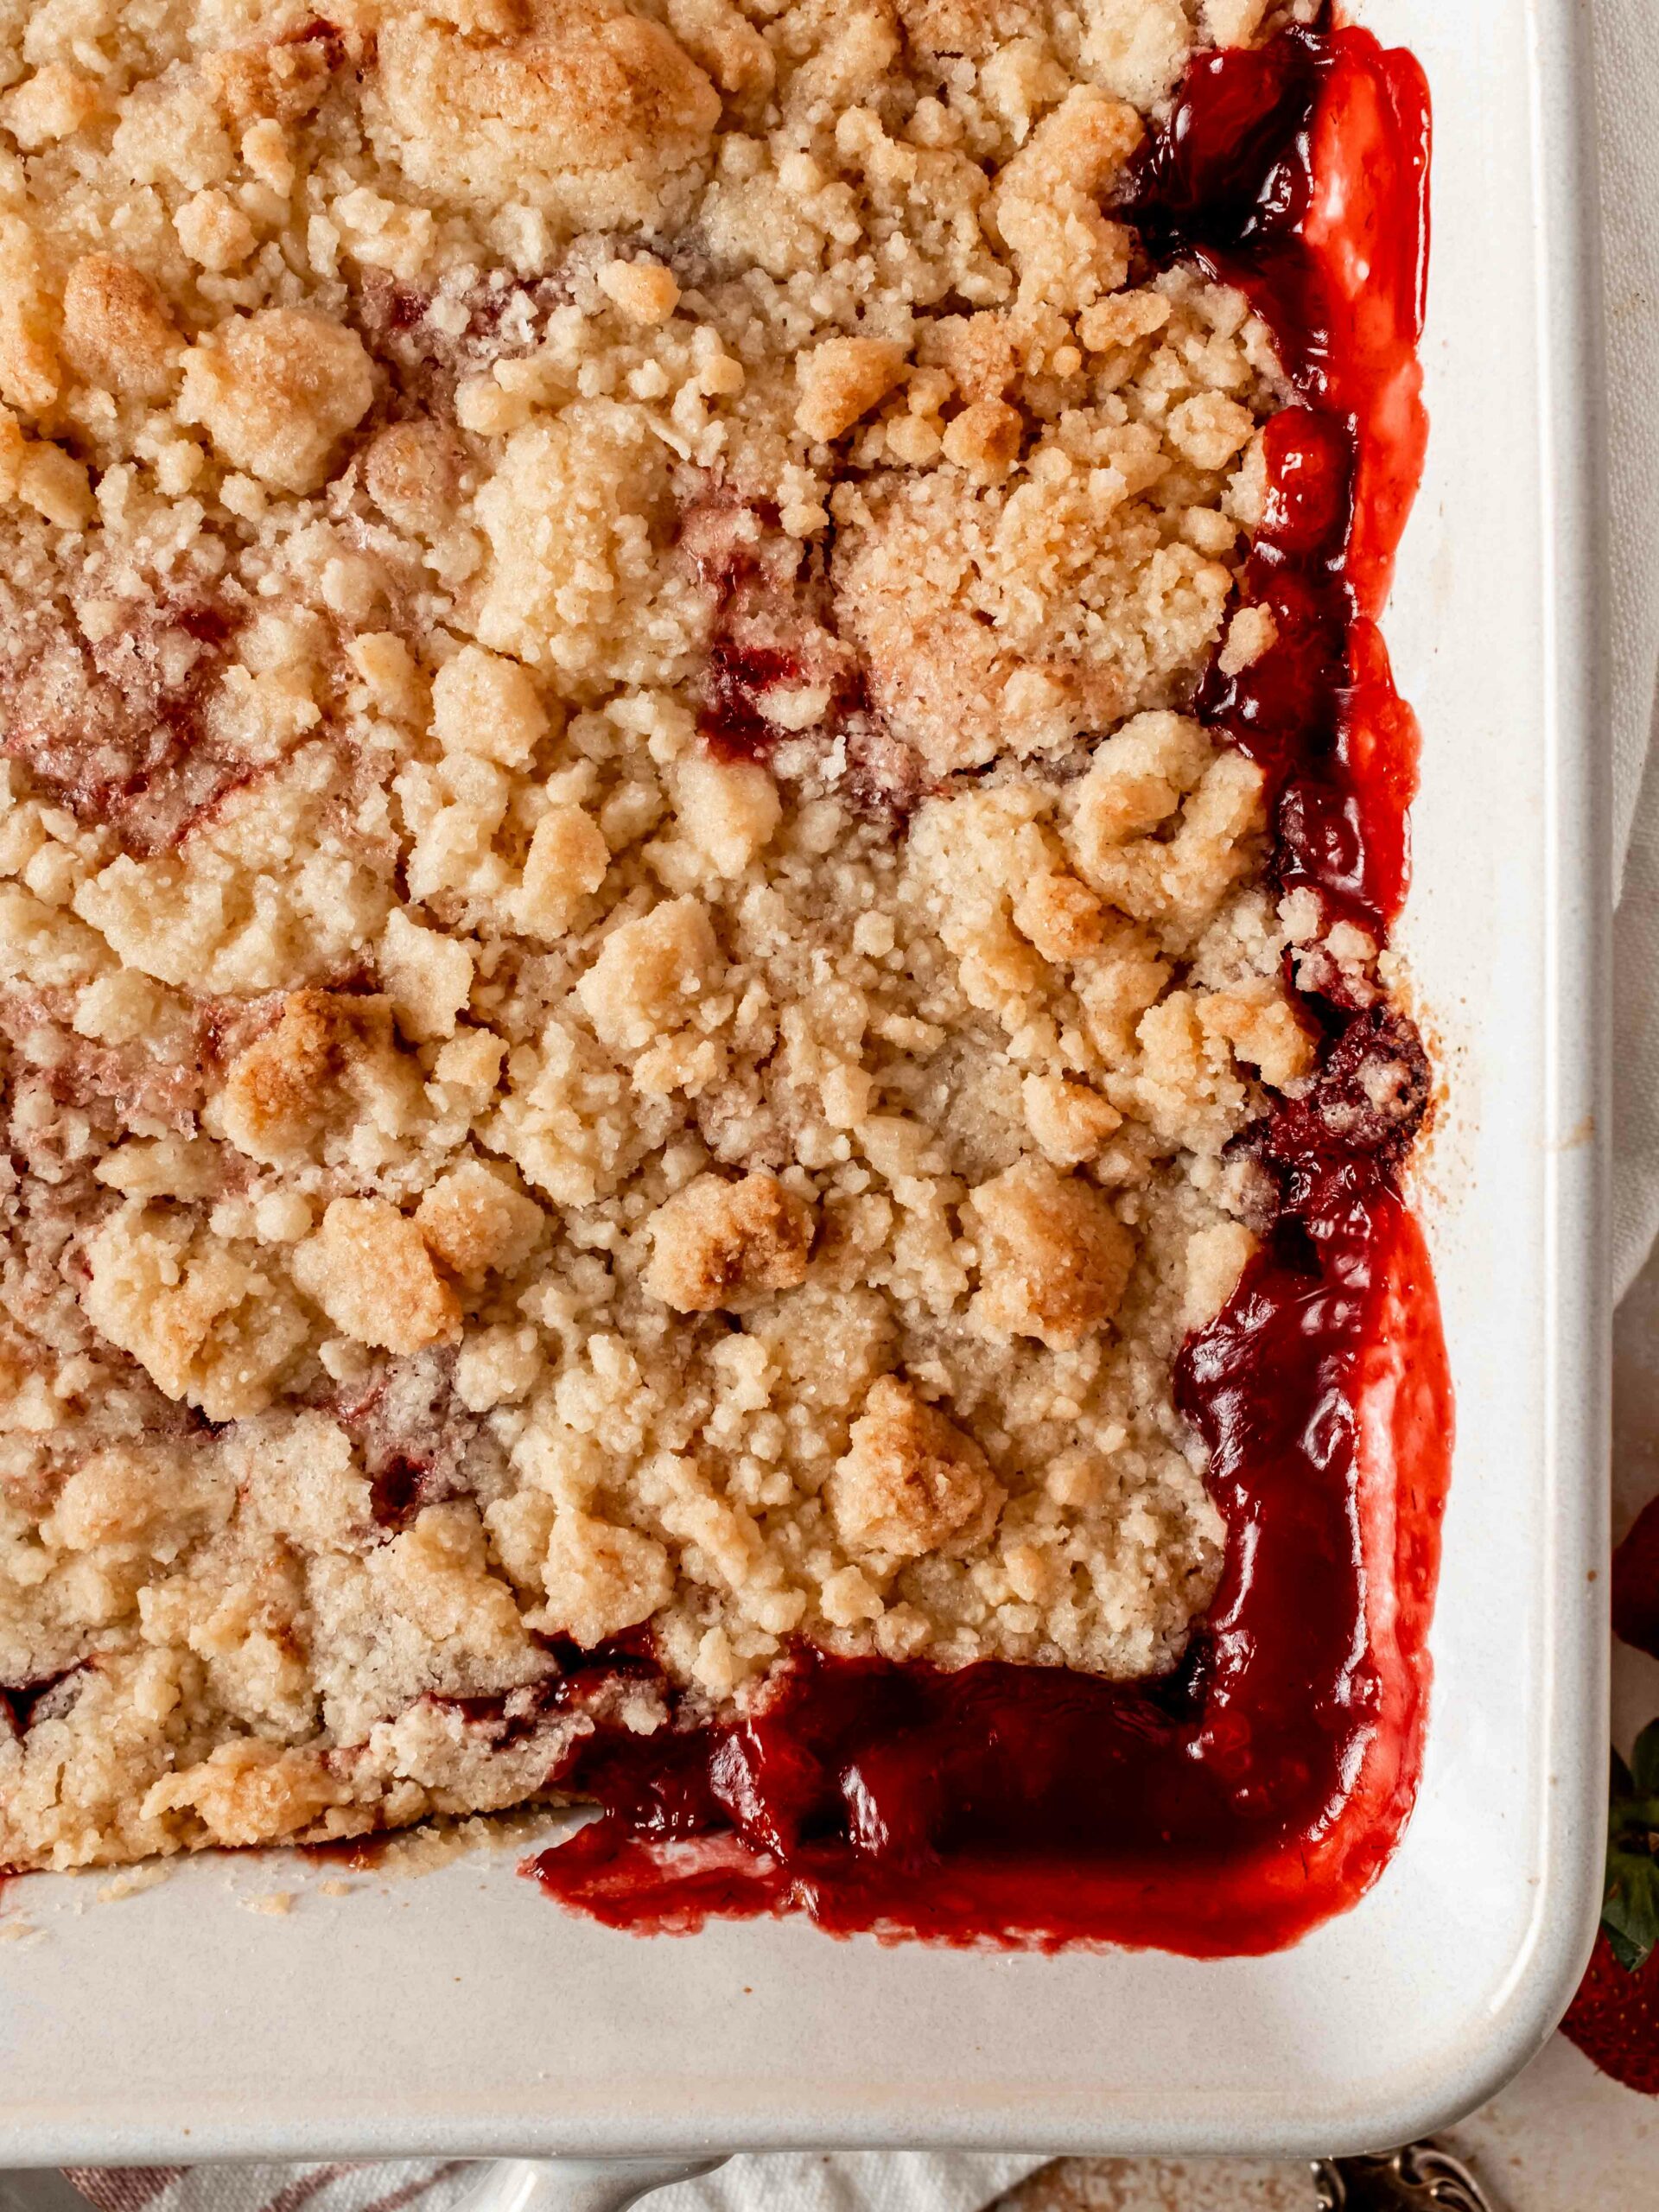 baked strawberries with crunchy crumble topping